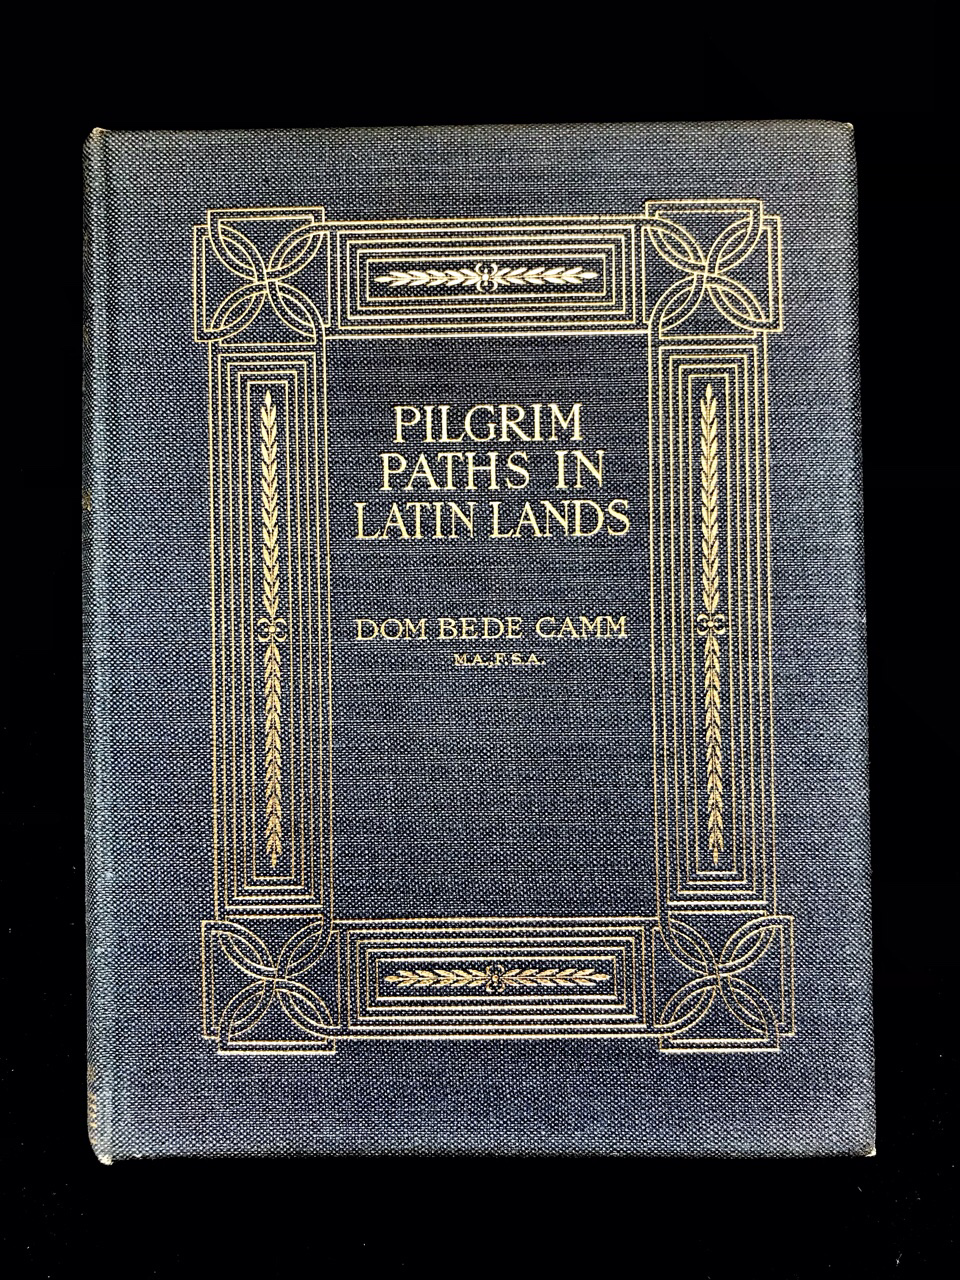 Pilgrim Paths In Latin Lands by Dom Bede Camm